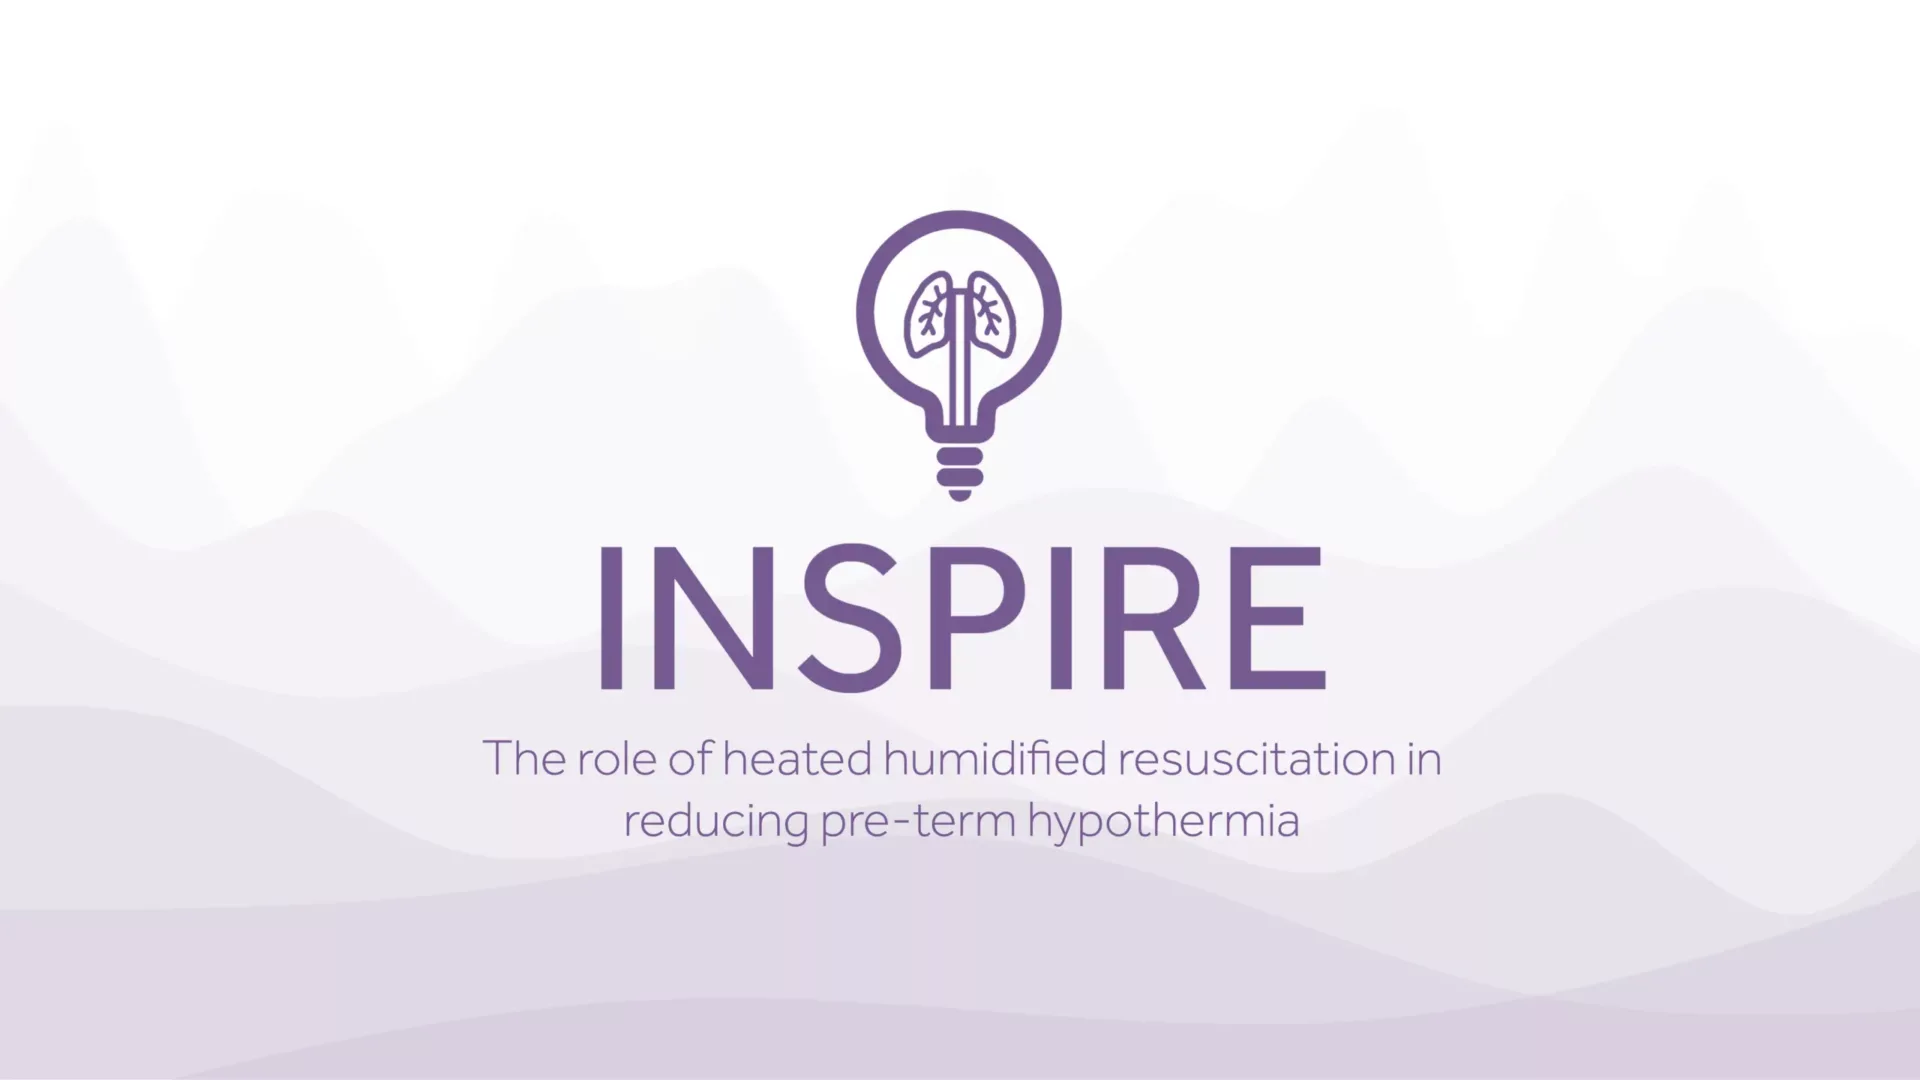 Brand identity of the INSPIRE blogs by Armstrong Medical